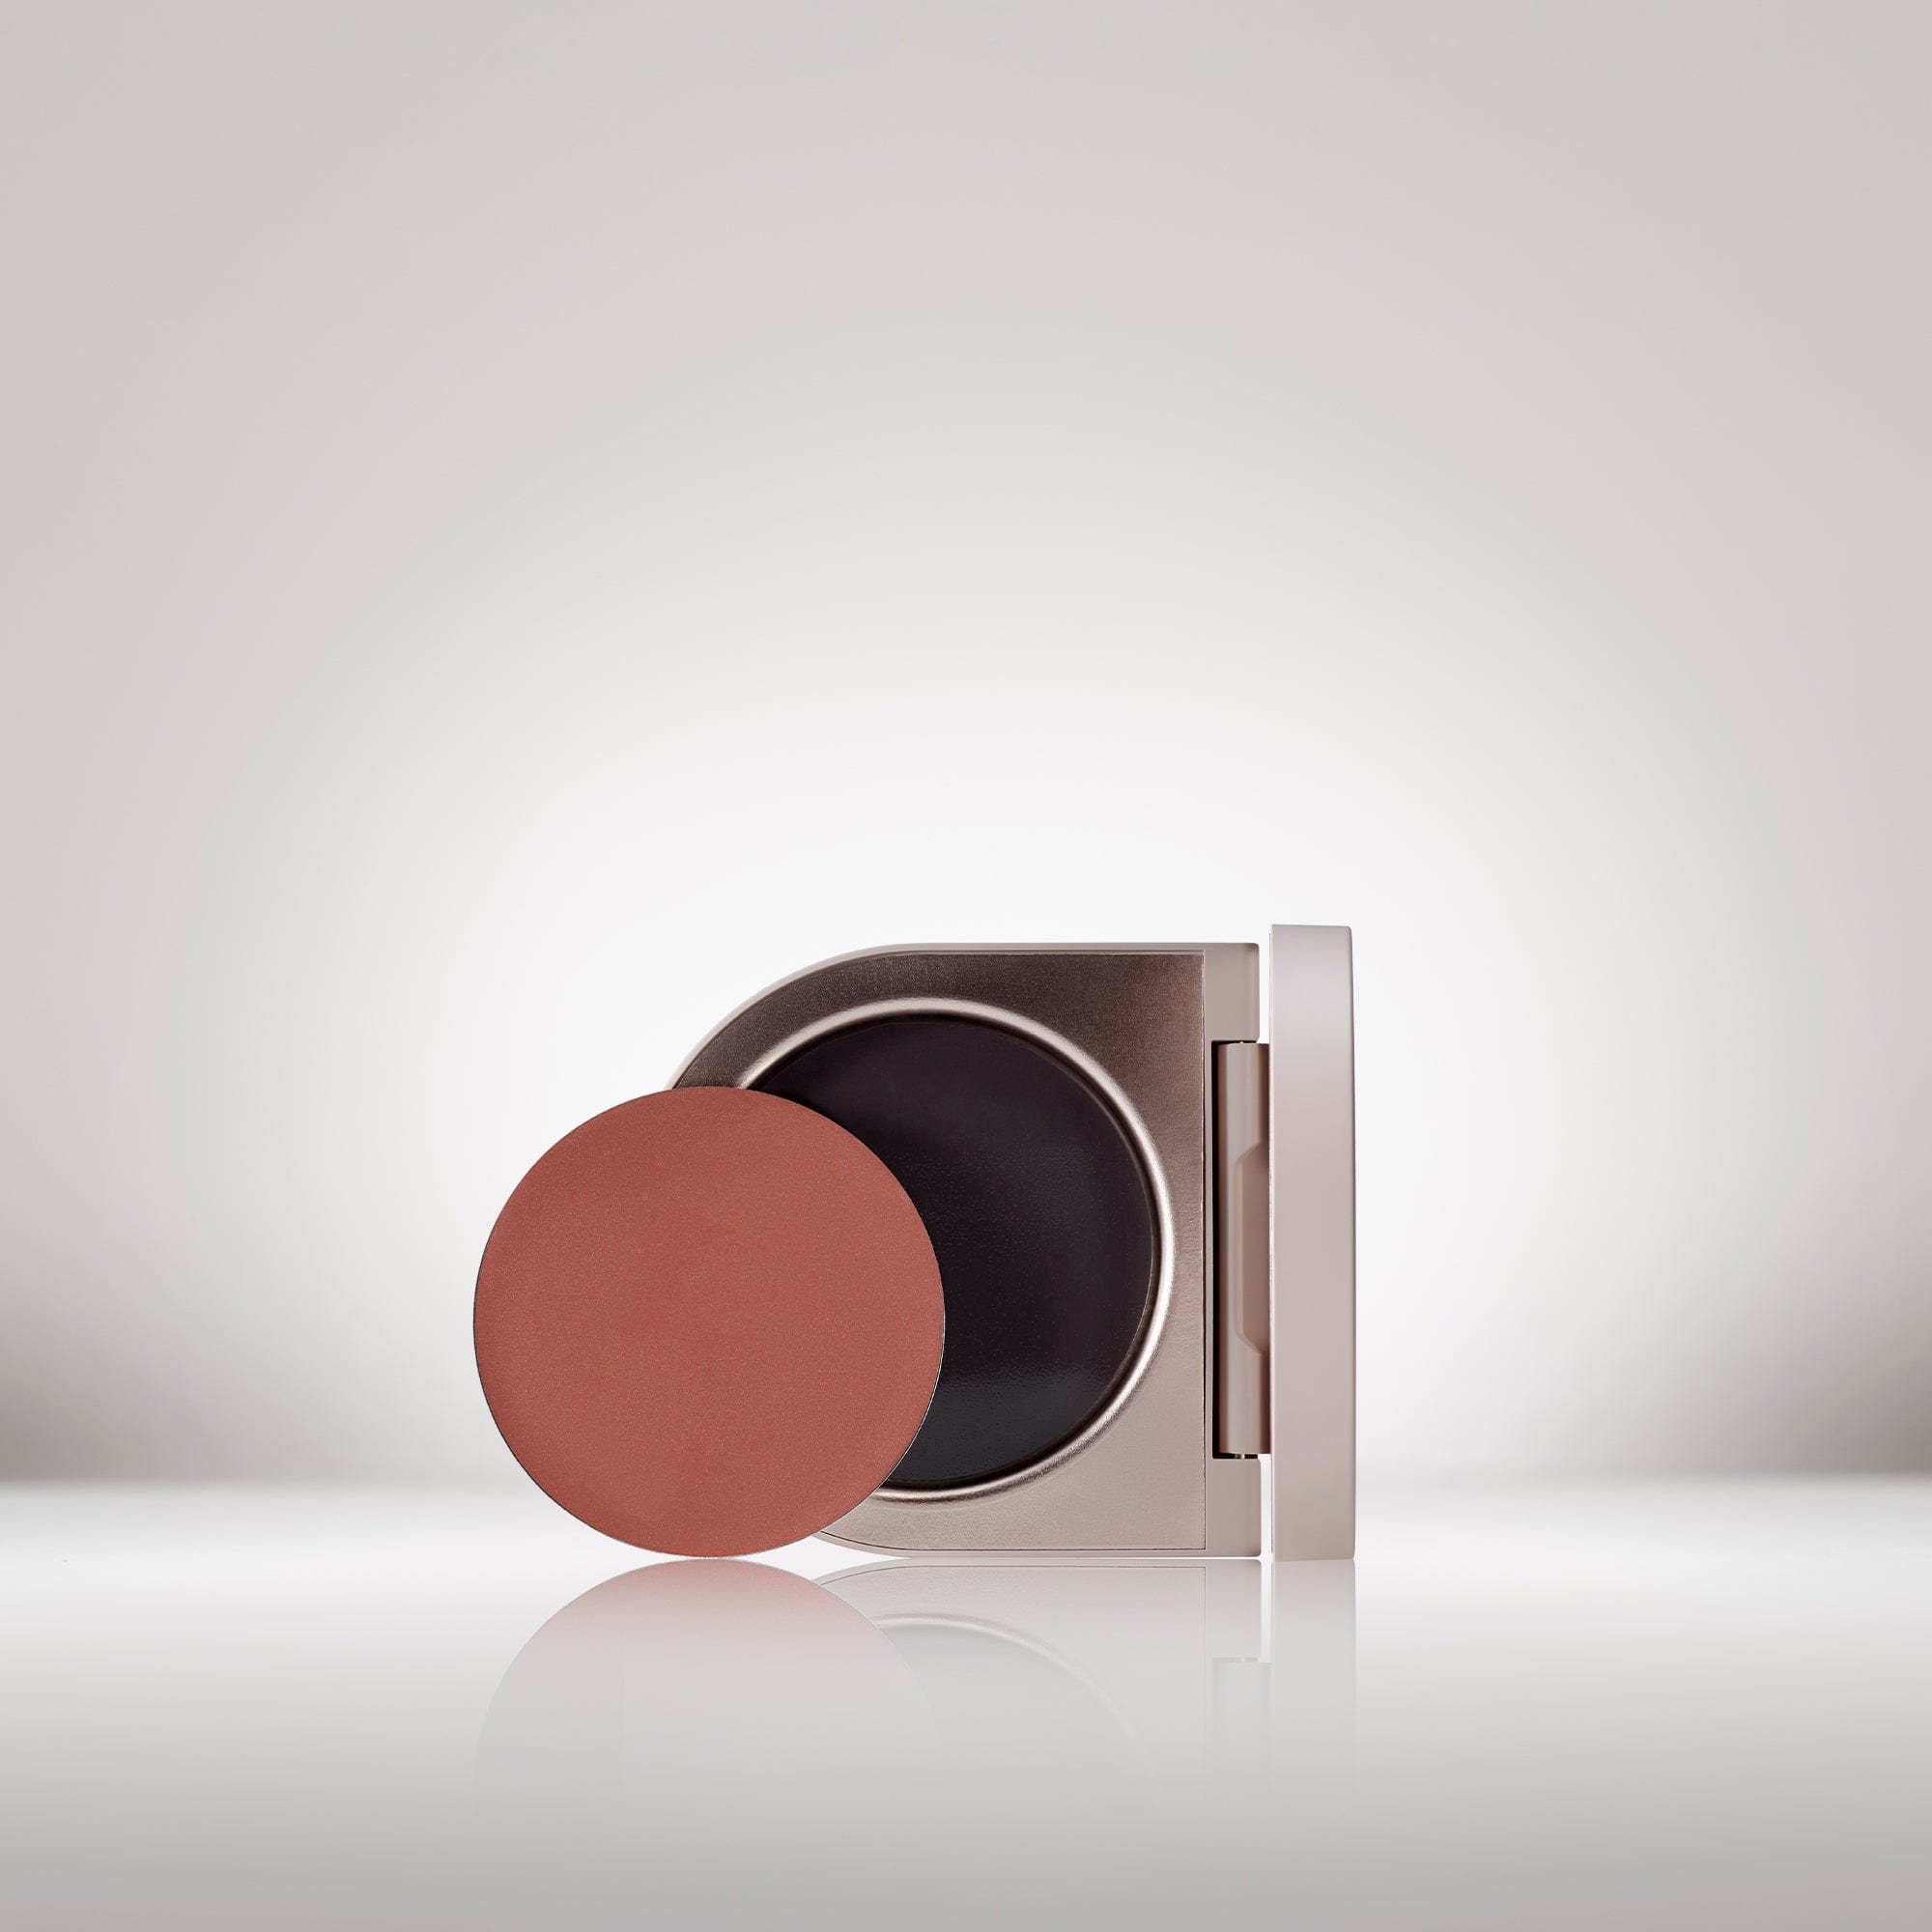 Image of the Cream Blush Refillable Cheek & Lip Color in Daylily in front of the open compact- Cream blush